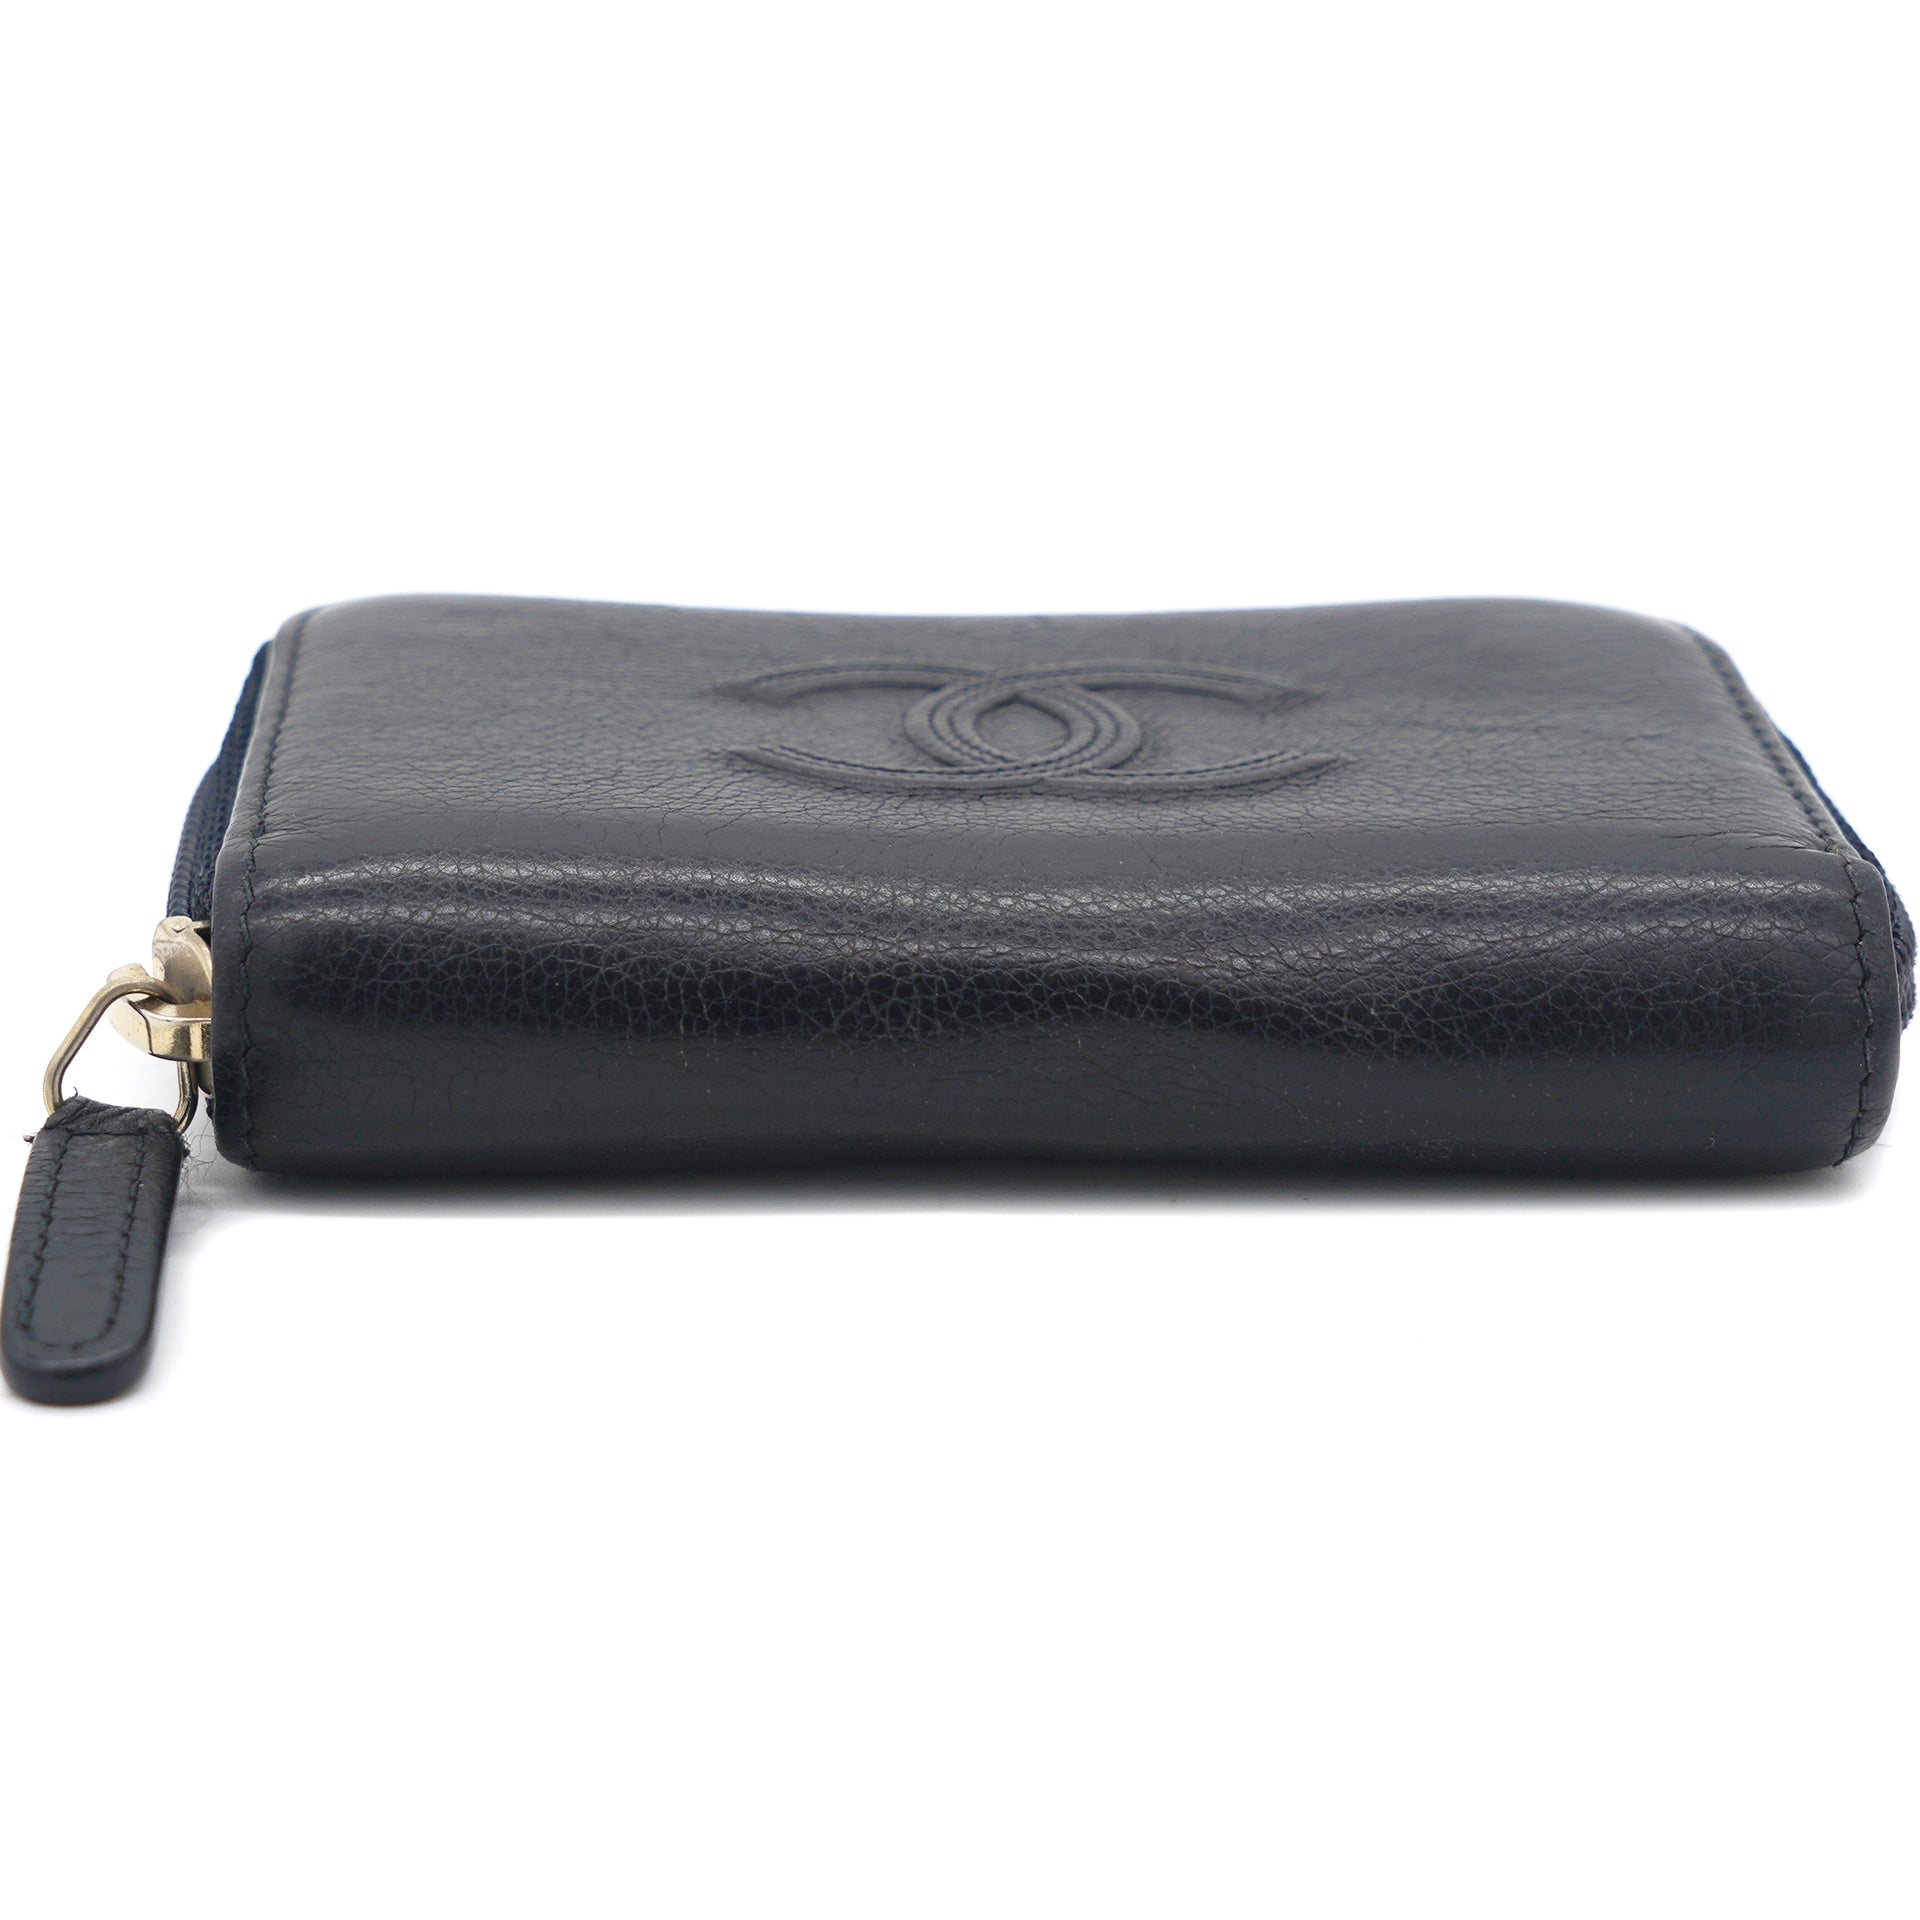 Chanel 2009-2010 Caviar Leather Coin Pouch - Black Wallets, Accessories -  CHA967903